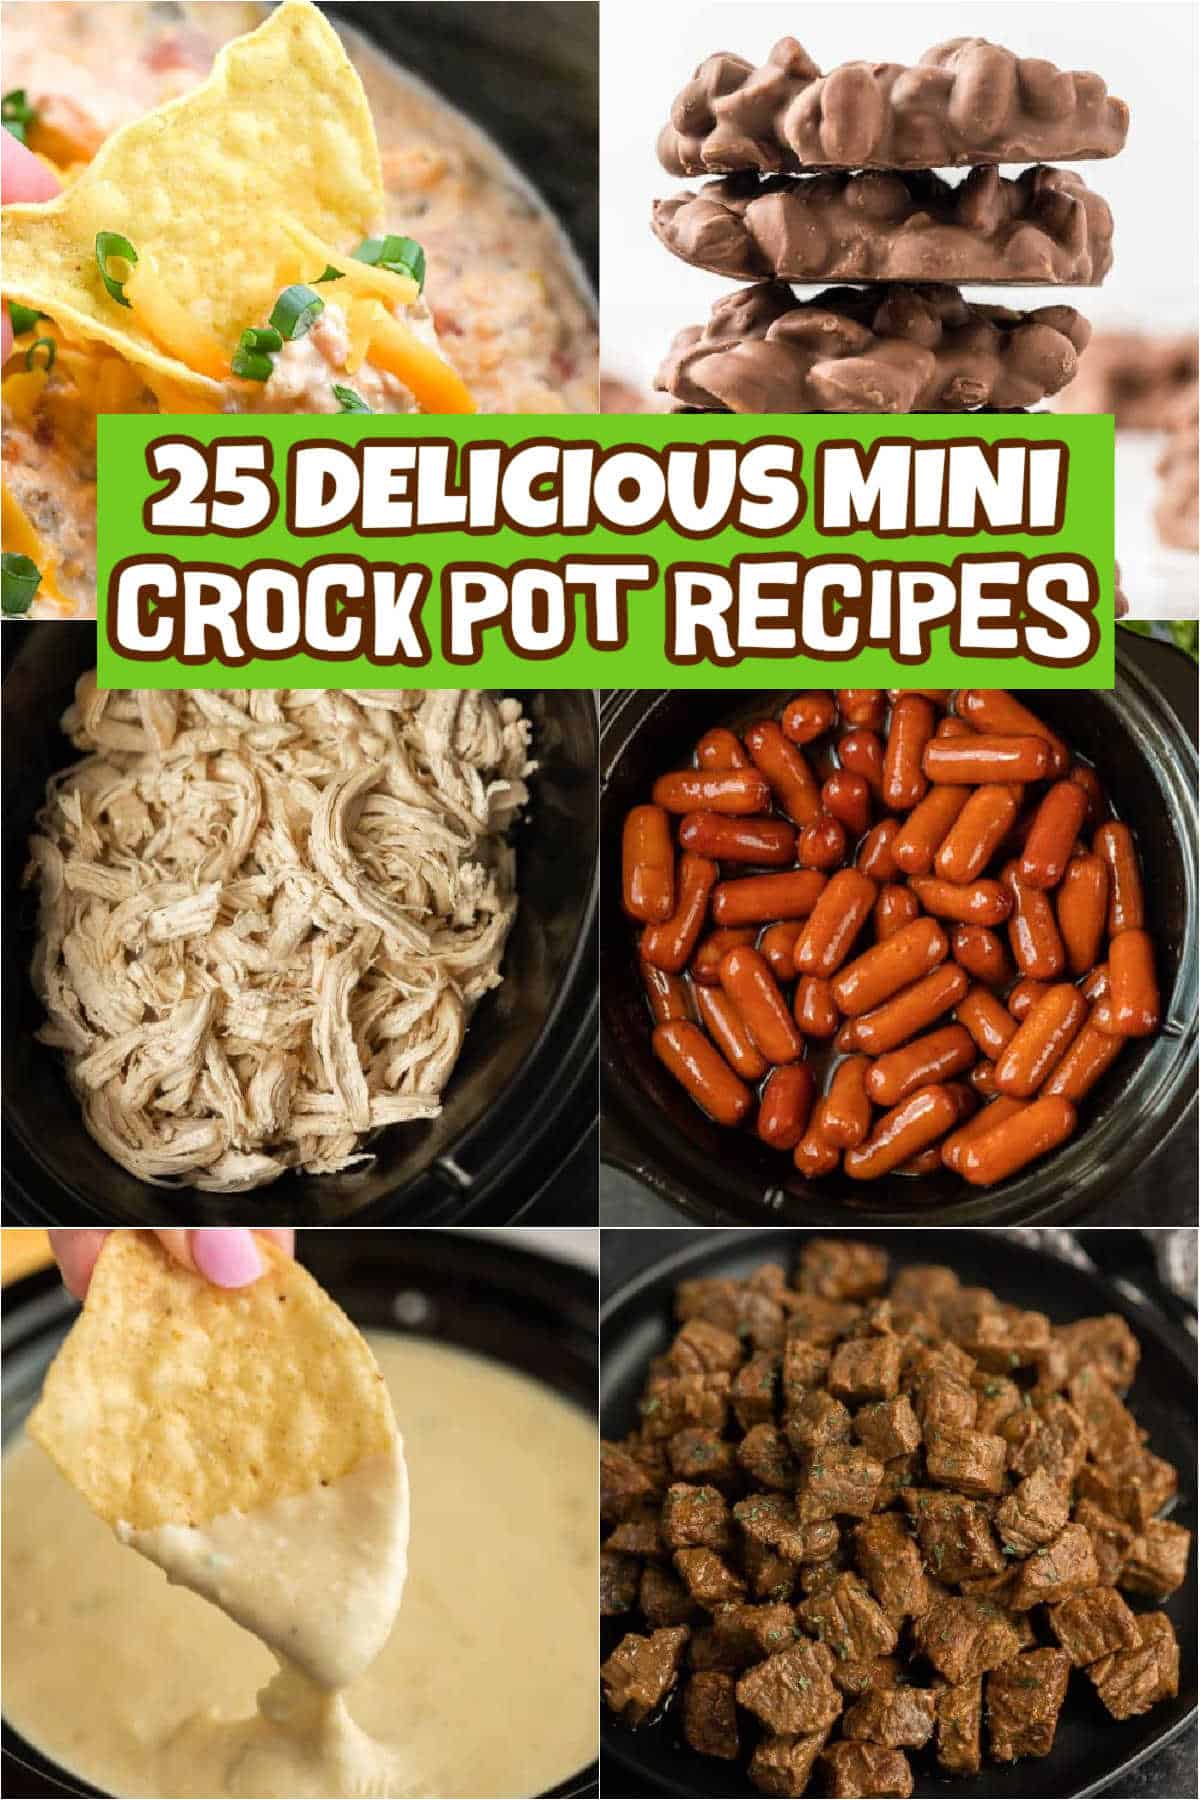 Mini Crock Pot Recipes are perfect for dips, appetizers, and cooking smaller servings. These 25 recipes will cook a smaller portion without having to worry about a lot of leftovers. 